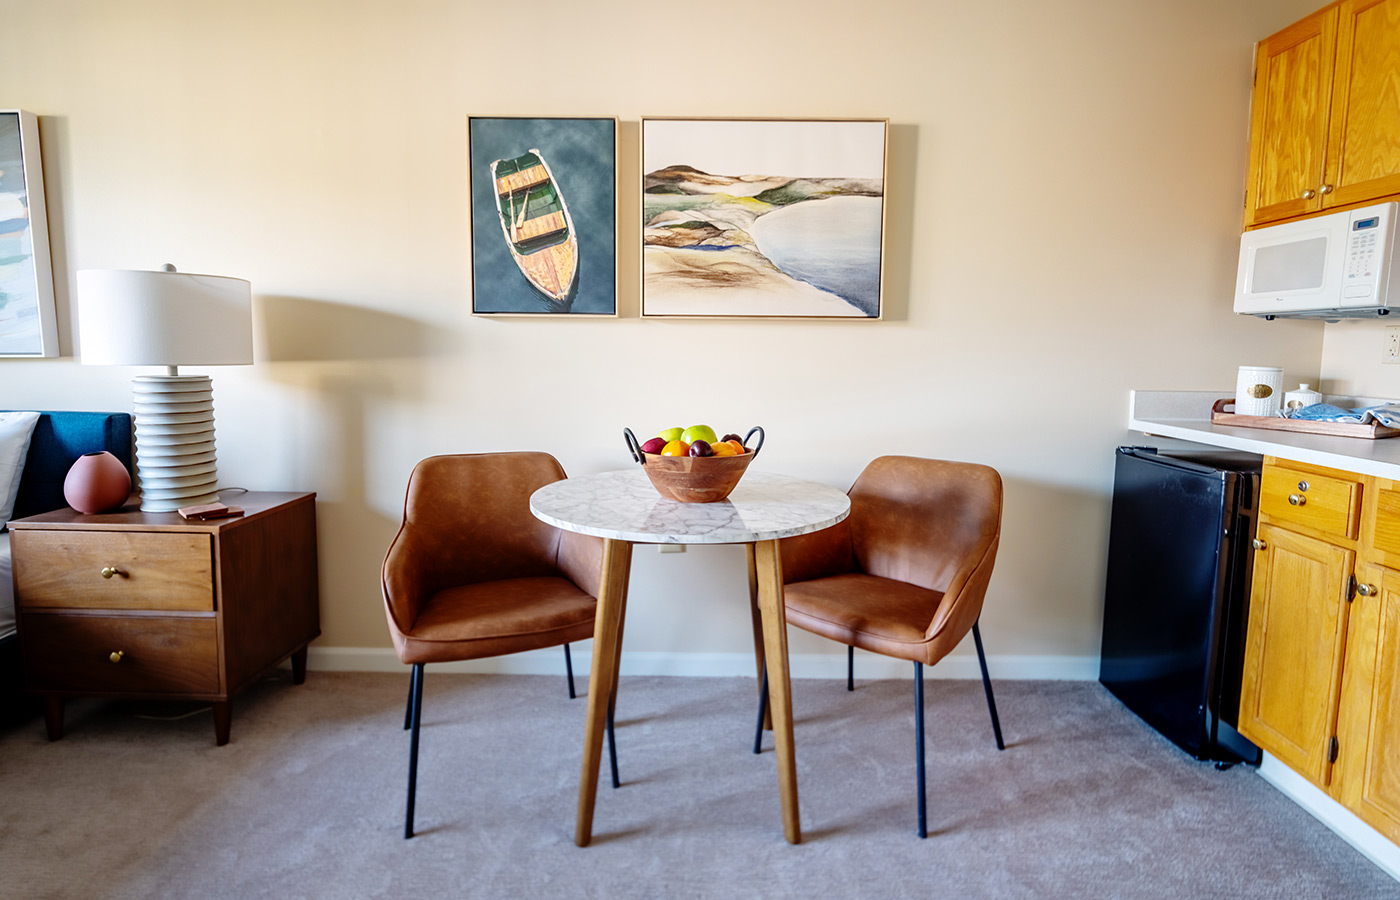 A furnished dining area in a studio apartment.